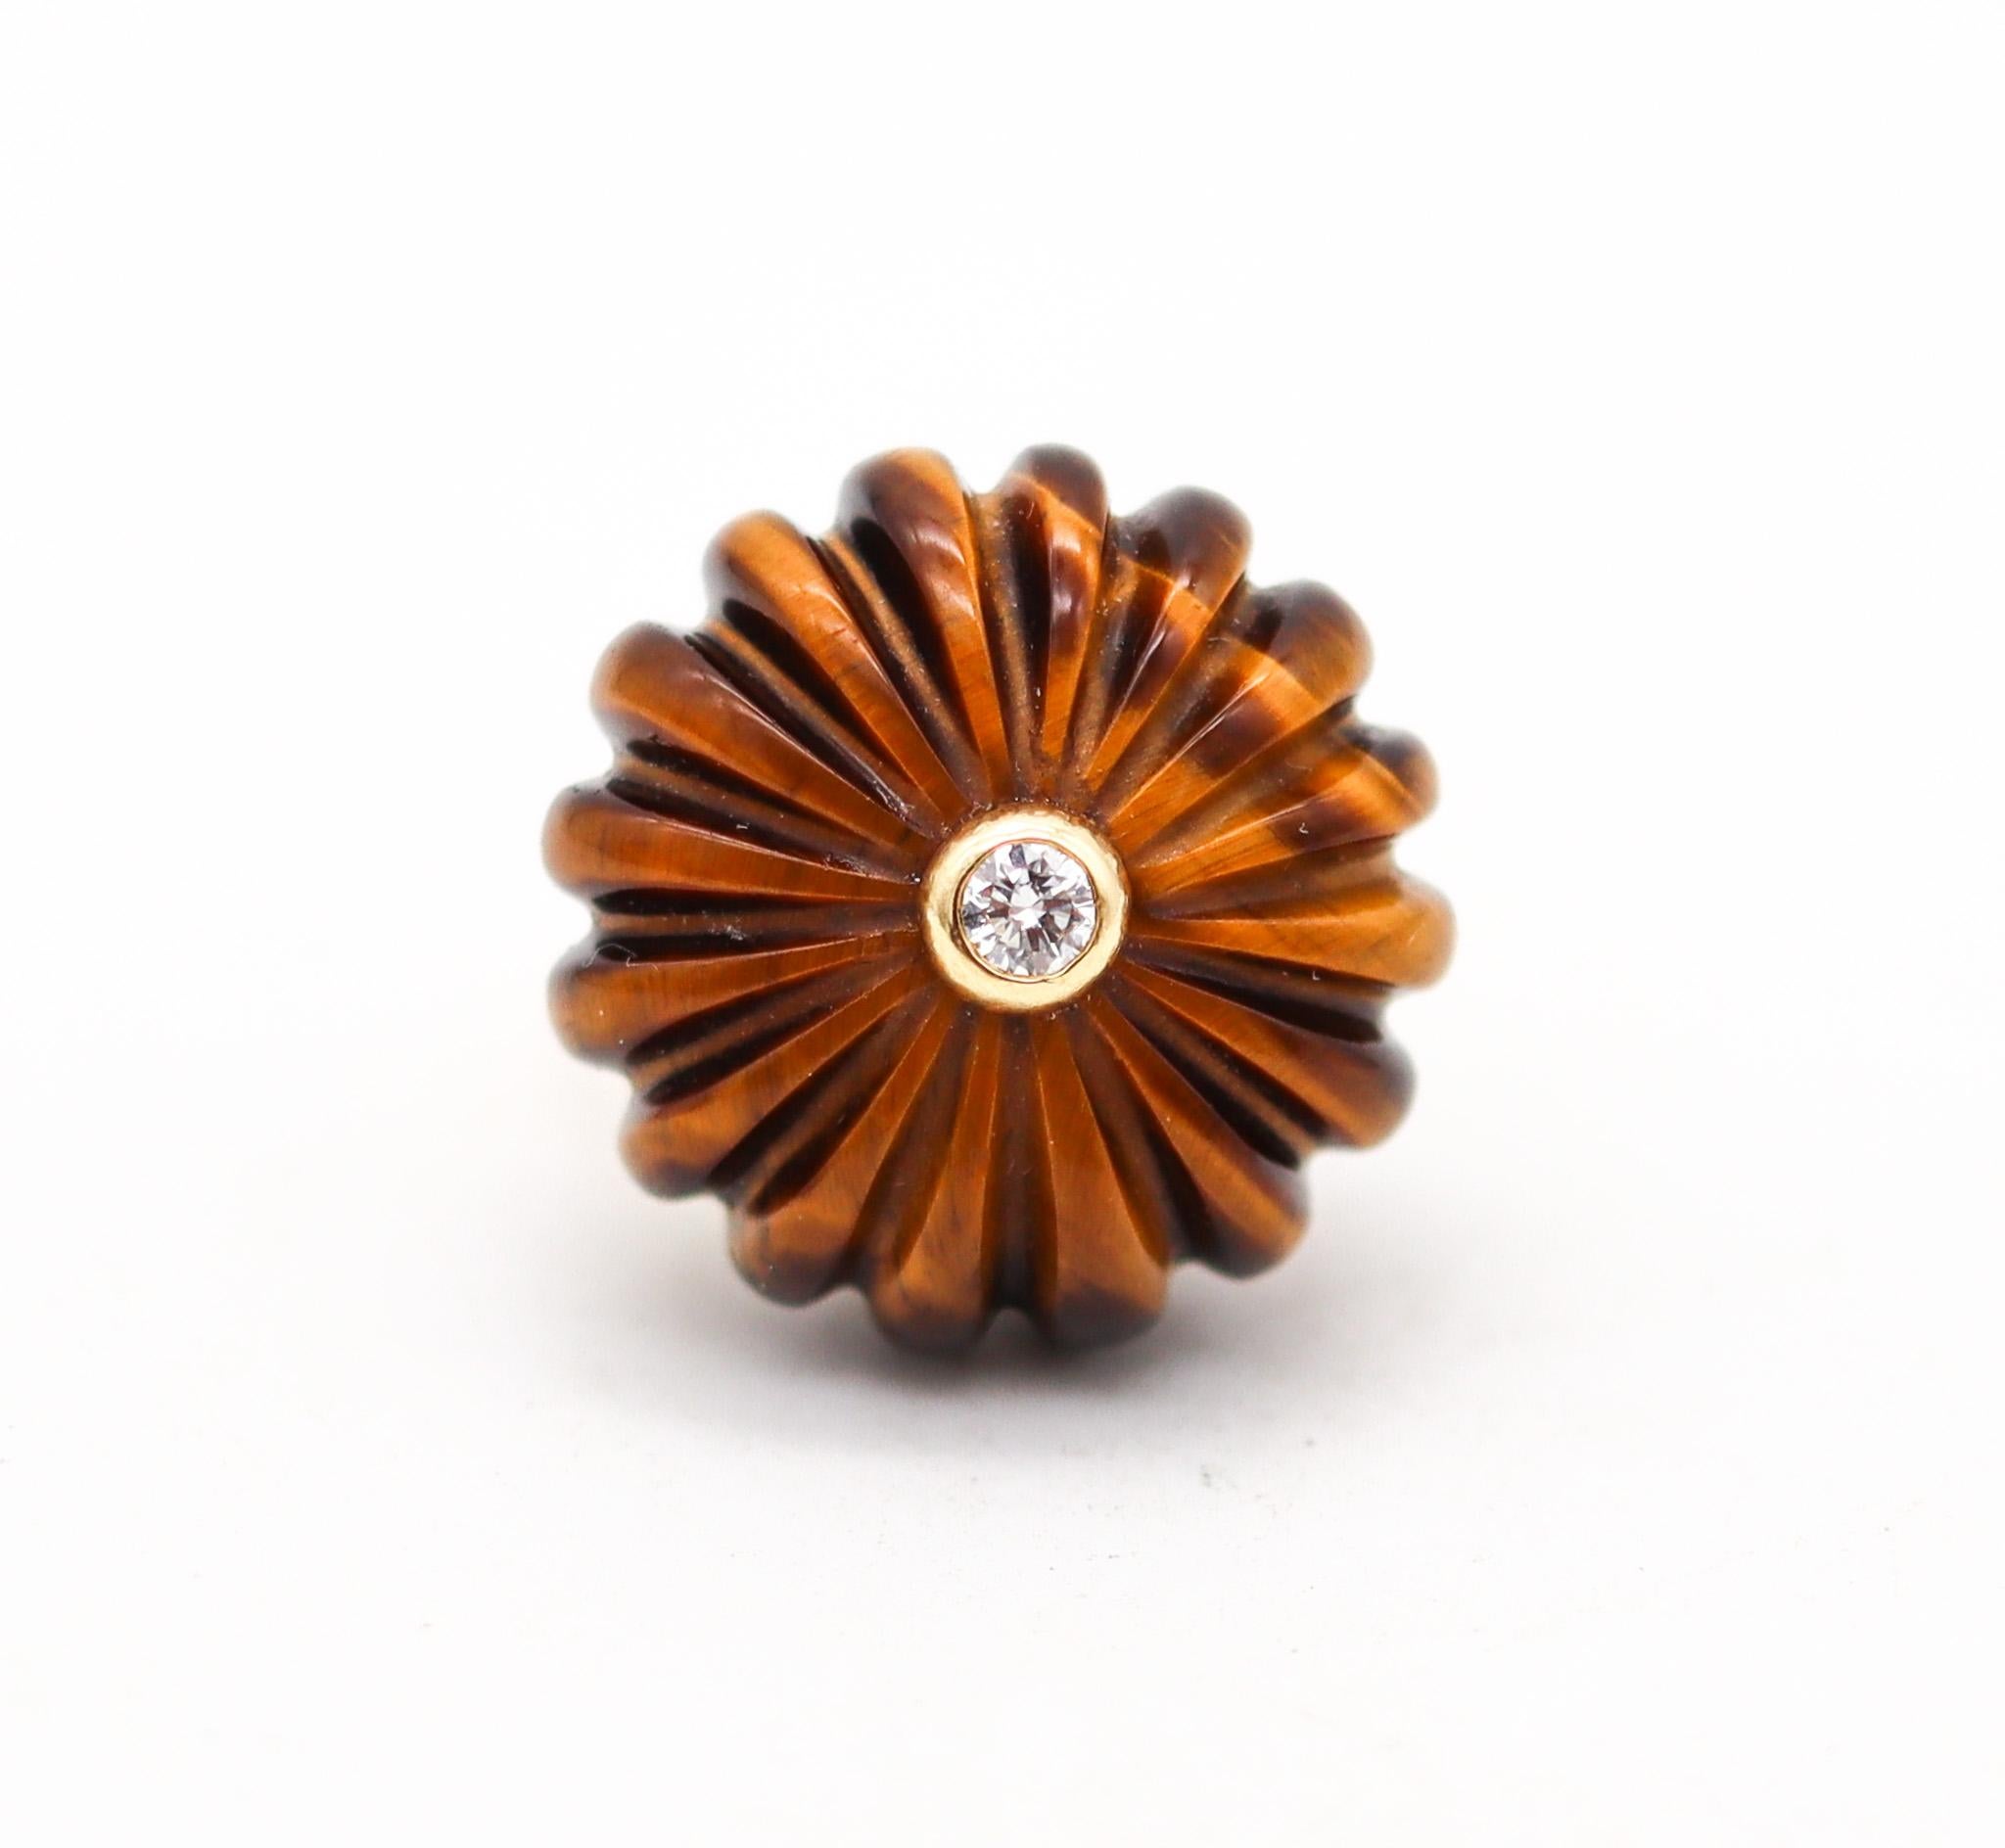 Modernist O. J. Perrin Paris 1970 By Andre Vassort Tiger Eye Ring 18Kt Gold With Diamond For Sale